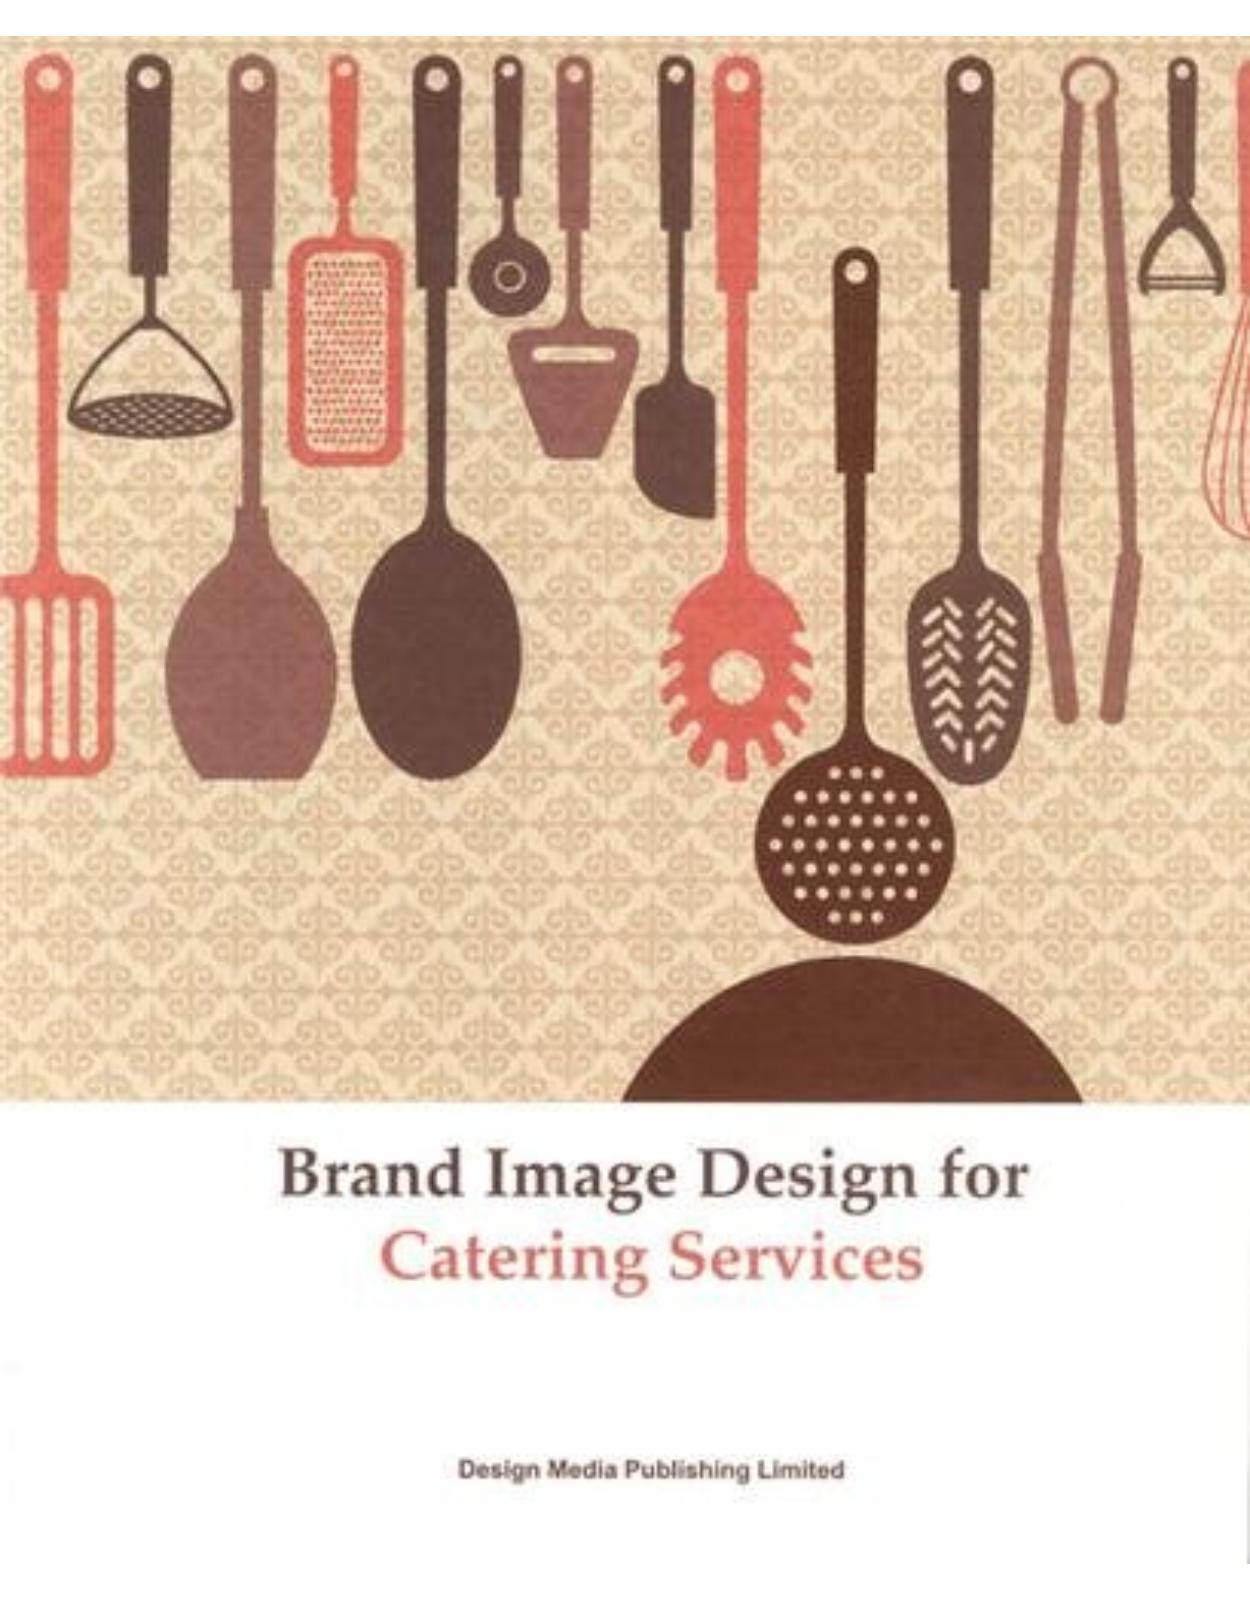 Brand Image Design for Catering Services